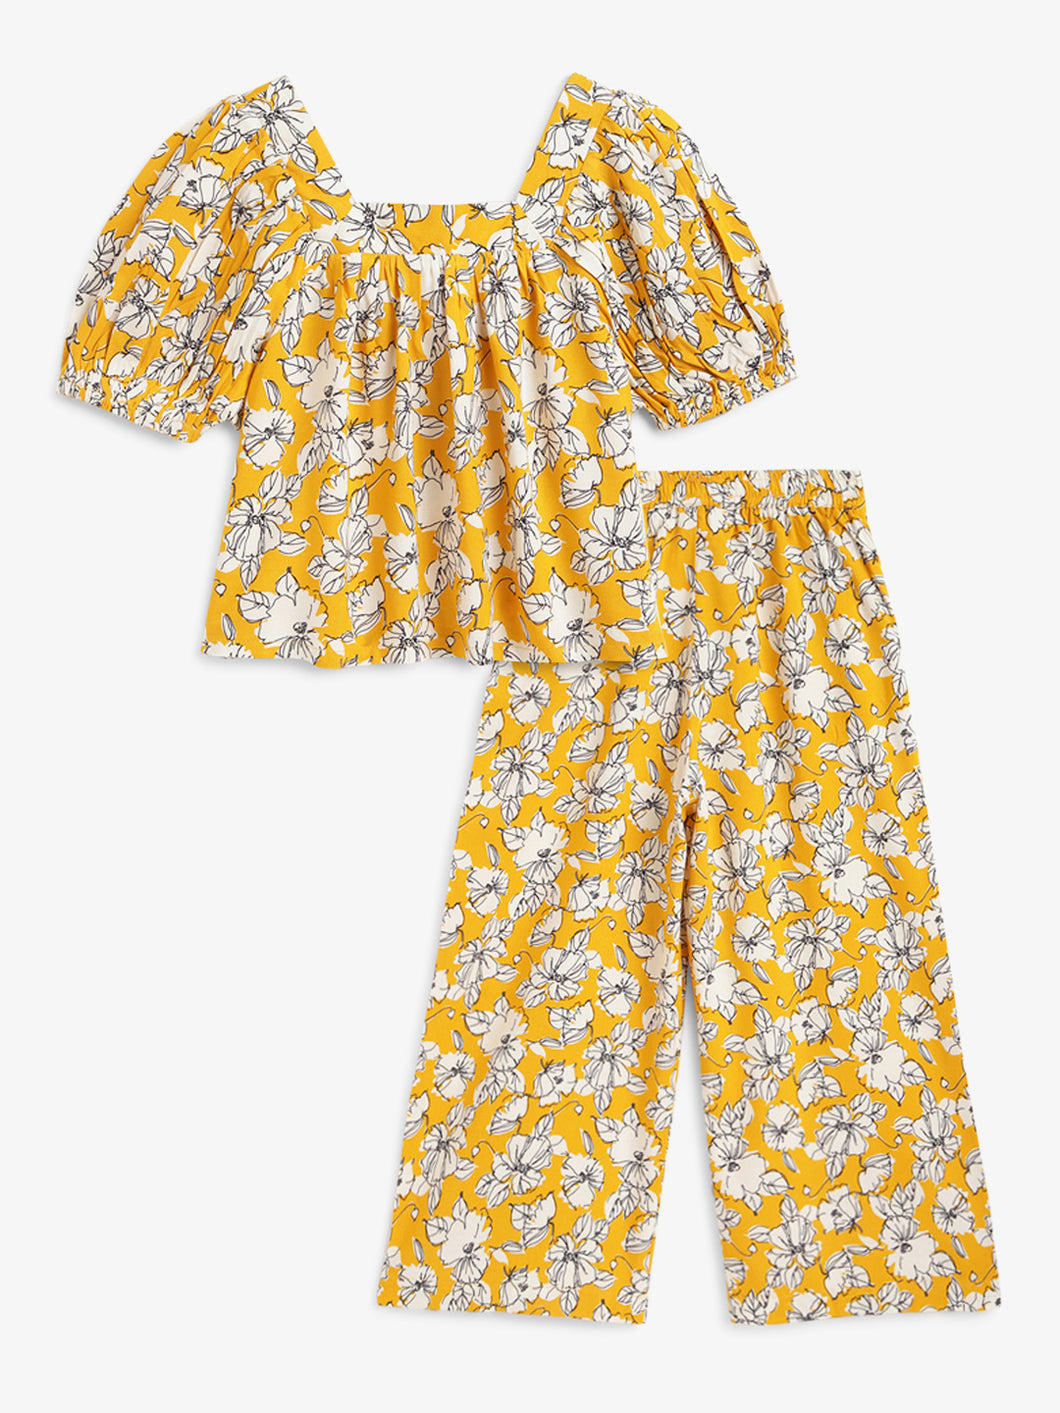 Campana Girls Mia Crop Top with Trousers Clothing Set - Flower Sketch Print - Yellow